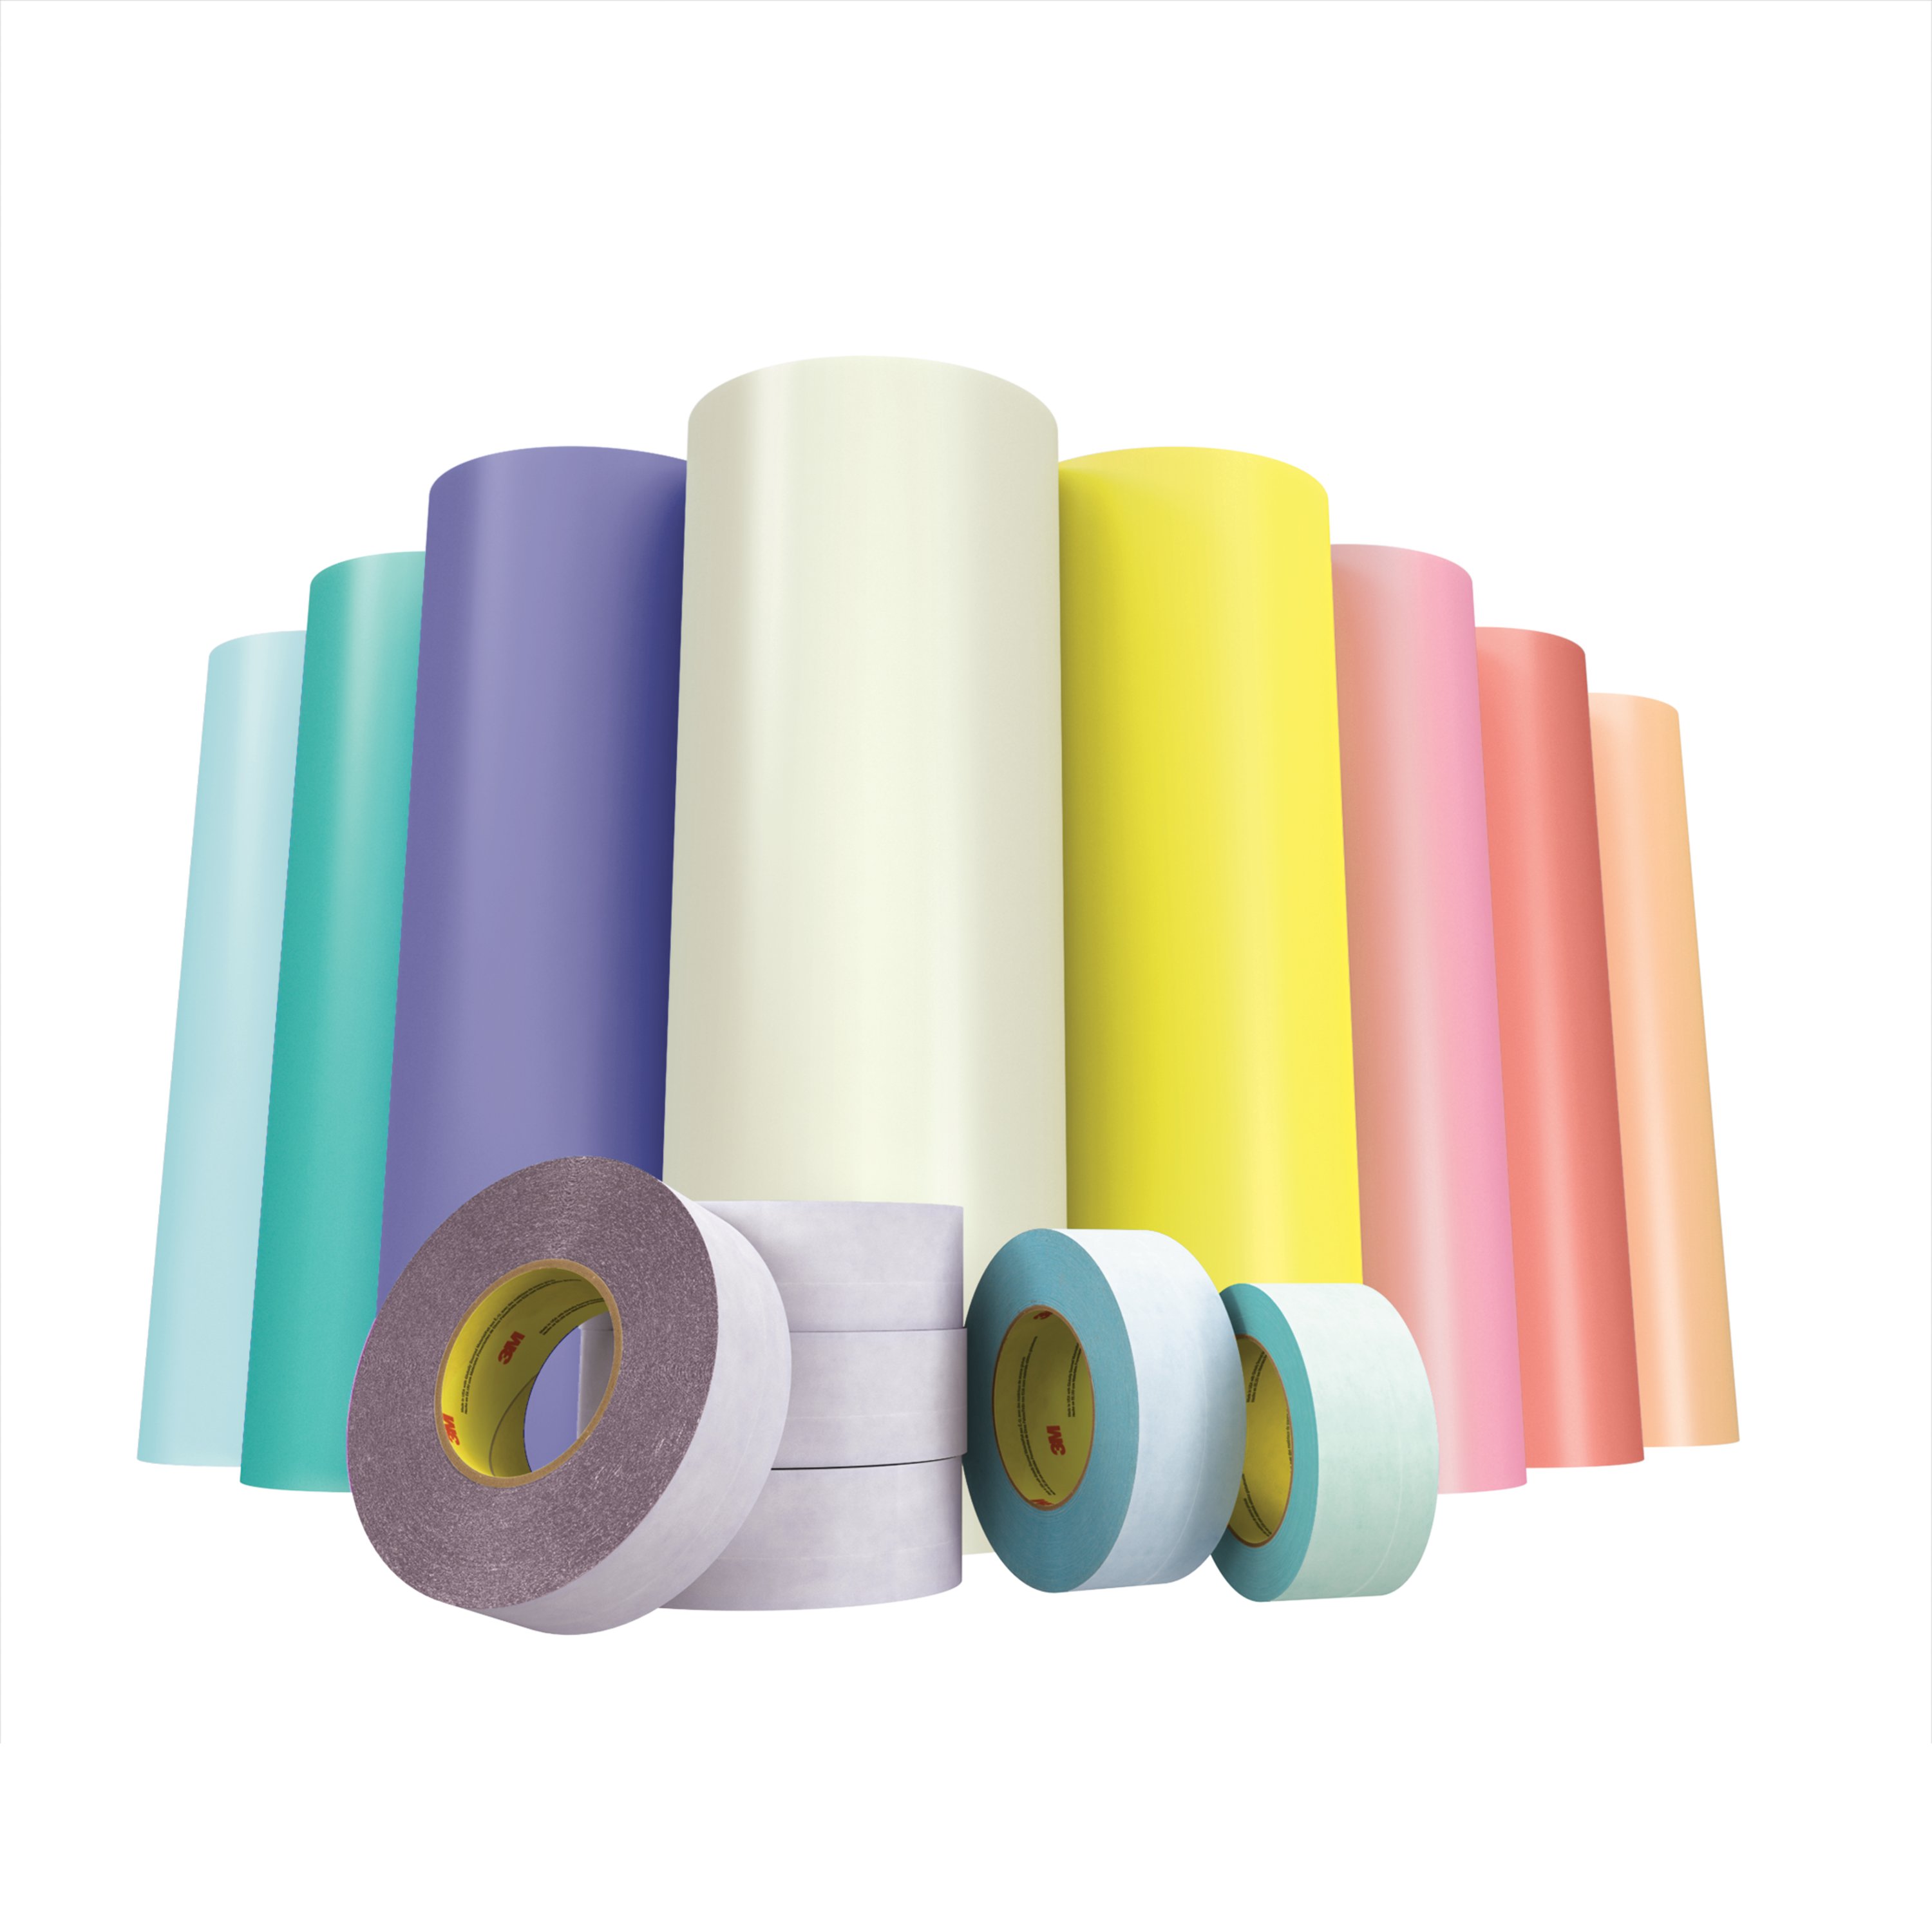 The whole line of plate mounting tapes pictured together